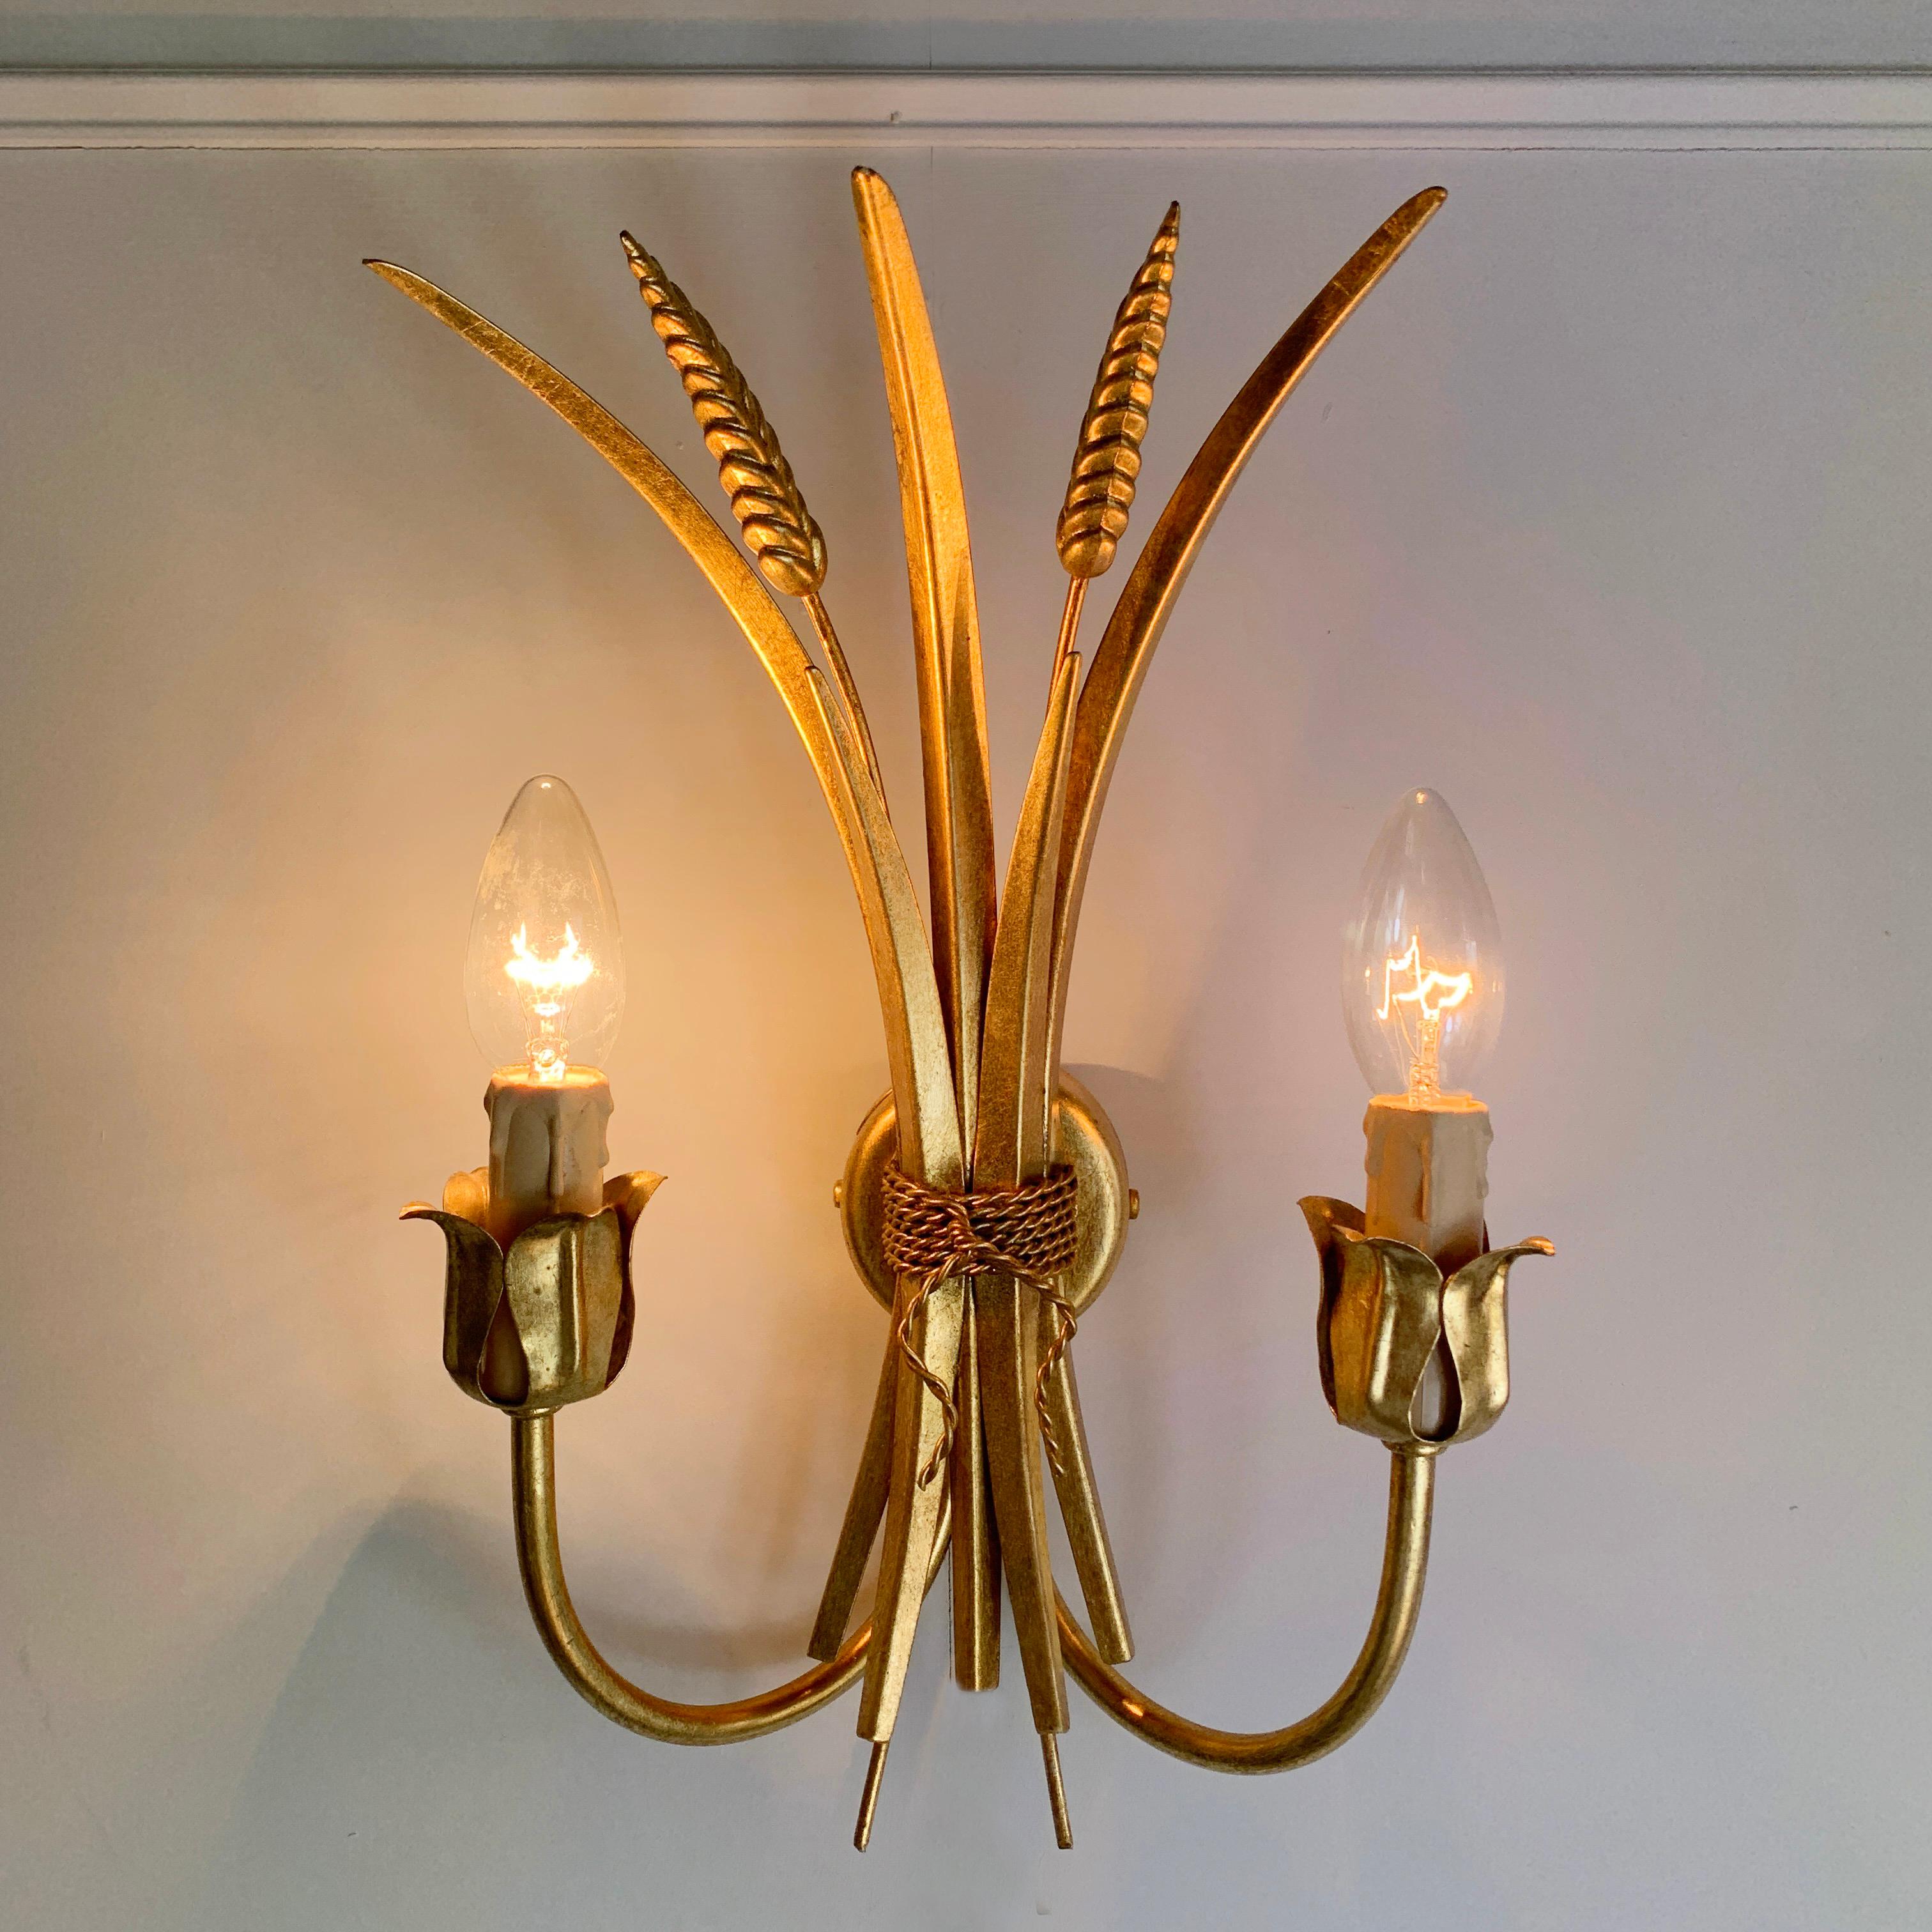 A beautiful trio of gilt gold Italian wheatsheaf wall lights. Dating to the early 1980’s the gilt leaf is in superb condition, and unusually they are a set of 3, exceptionally stylish interior lighting.

Measures: Height 36cm x width 25cm x